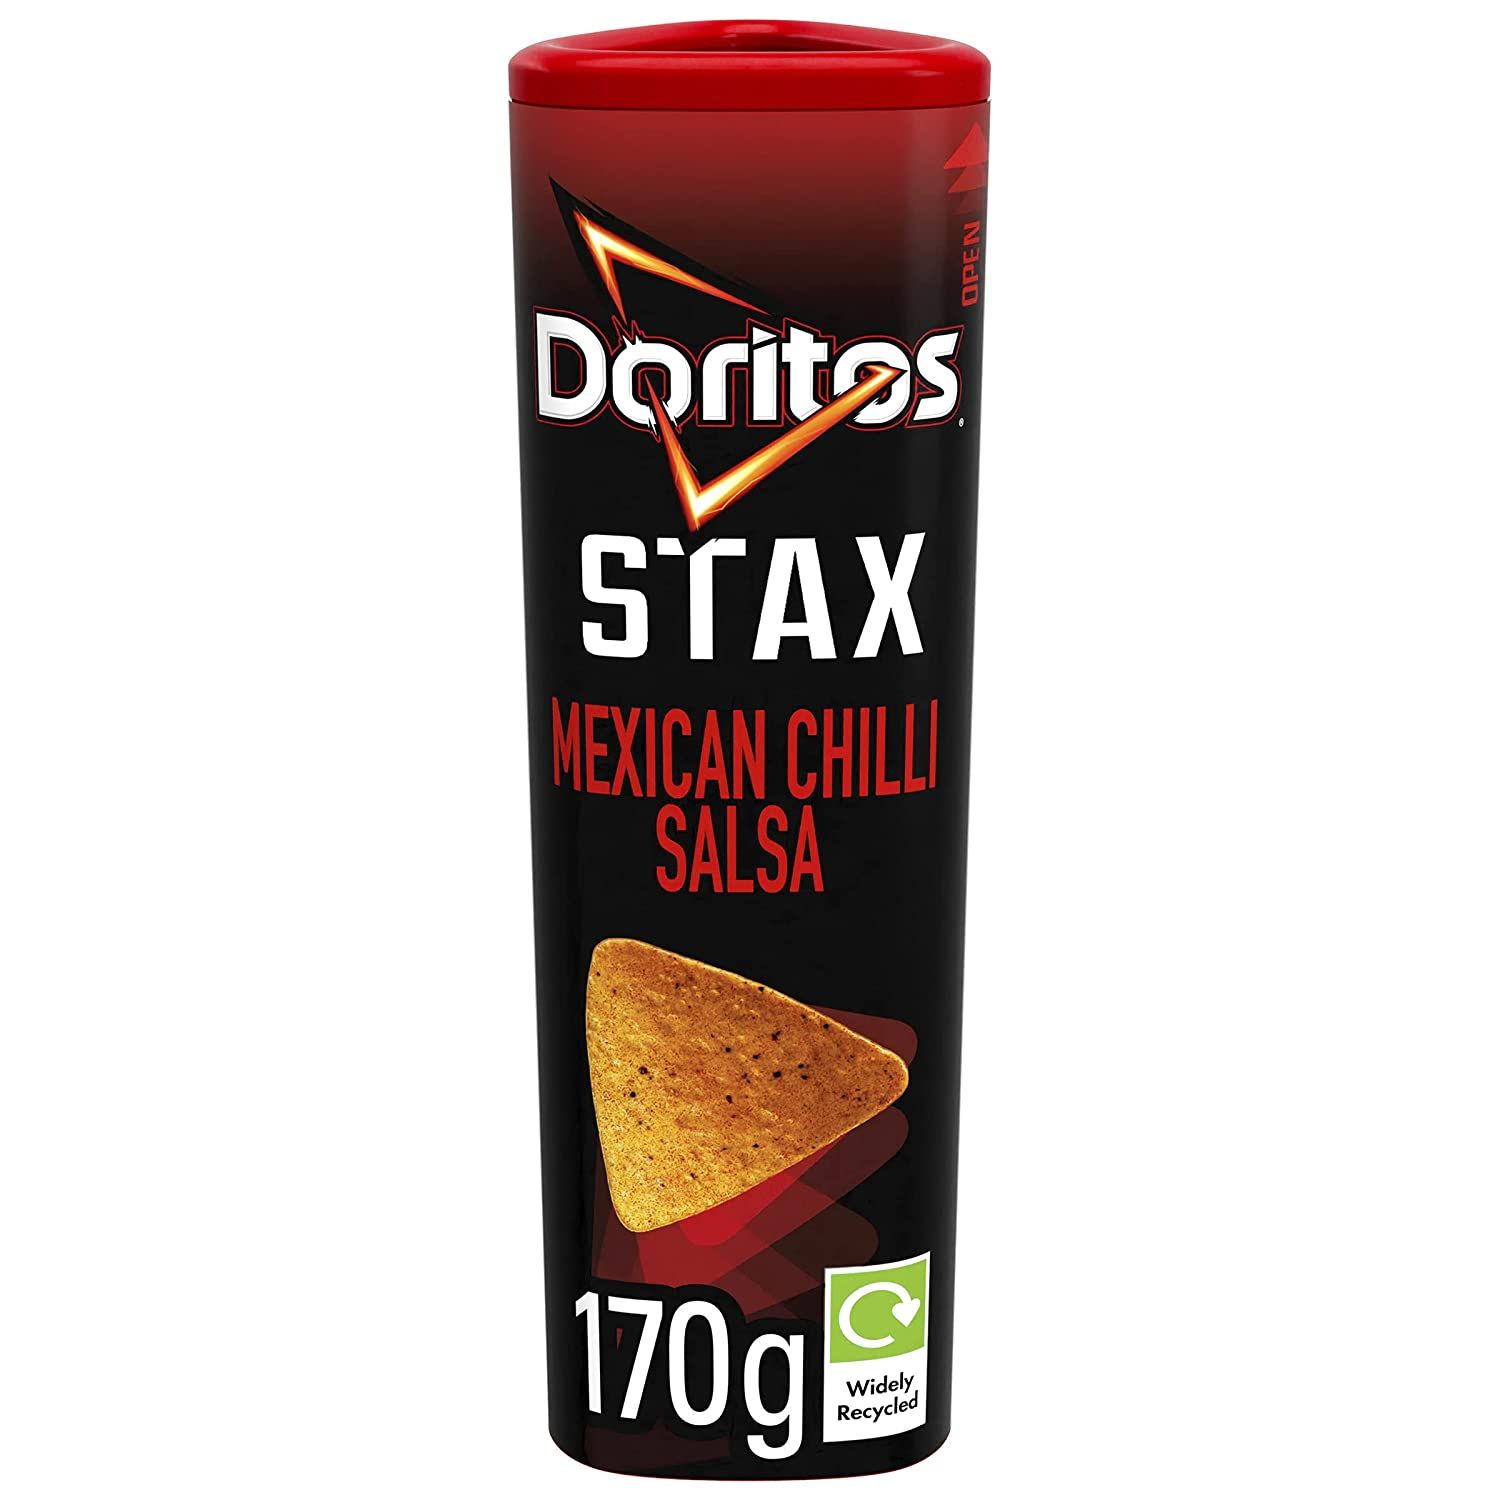 Doritos STAX Mexican Chilli Salsa Chips Image